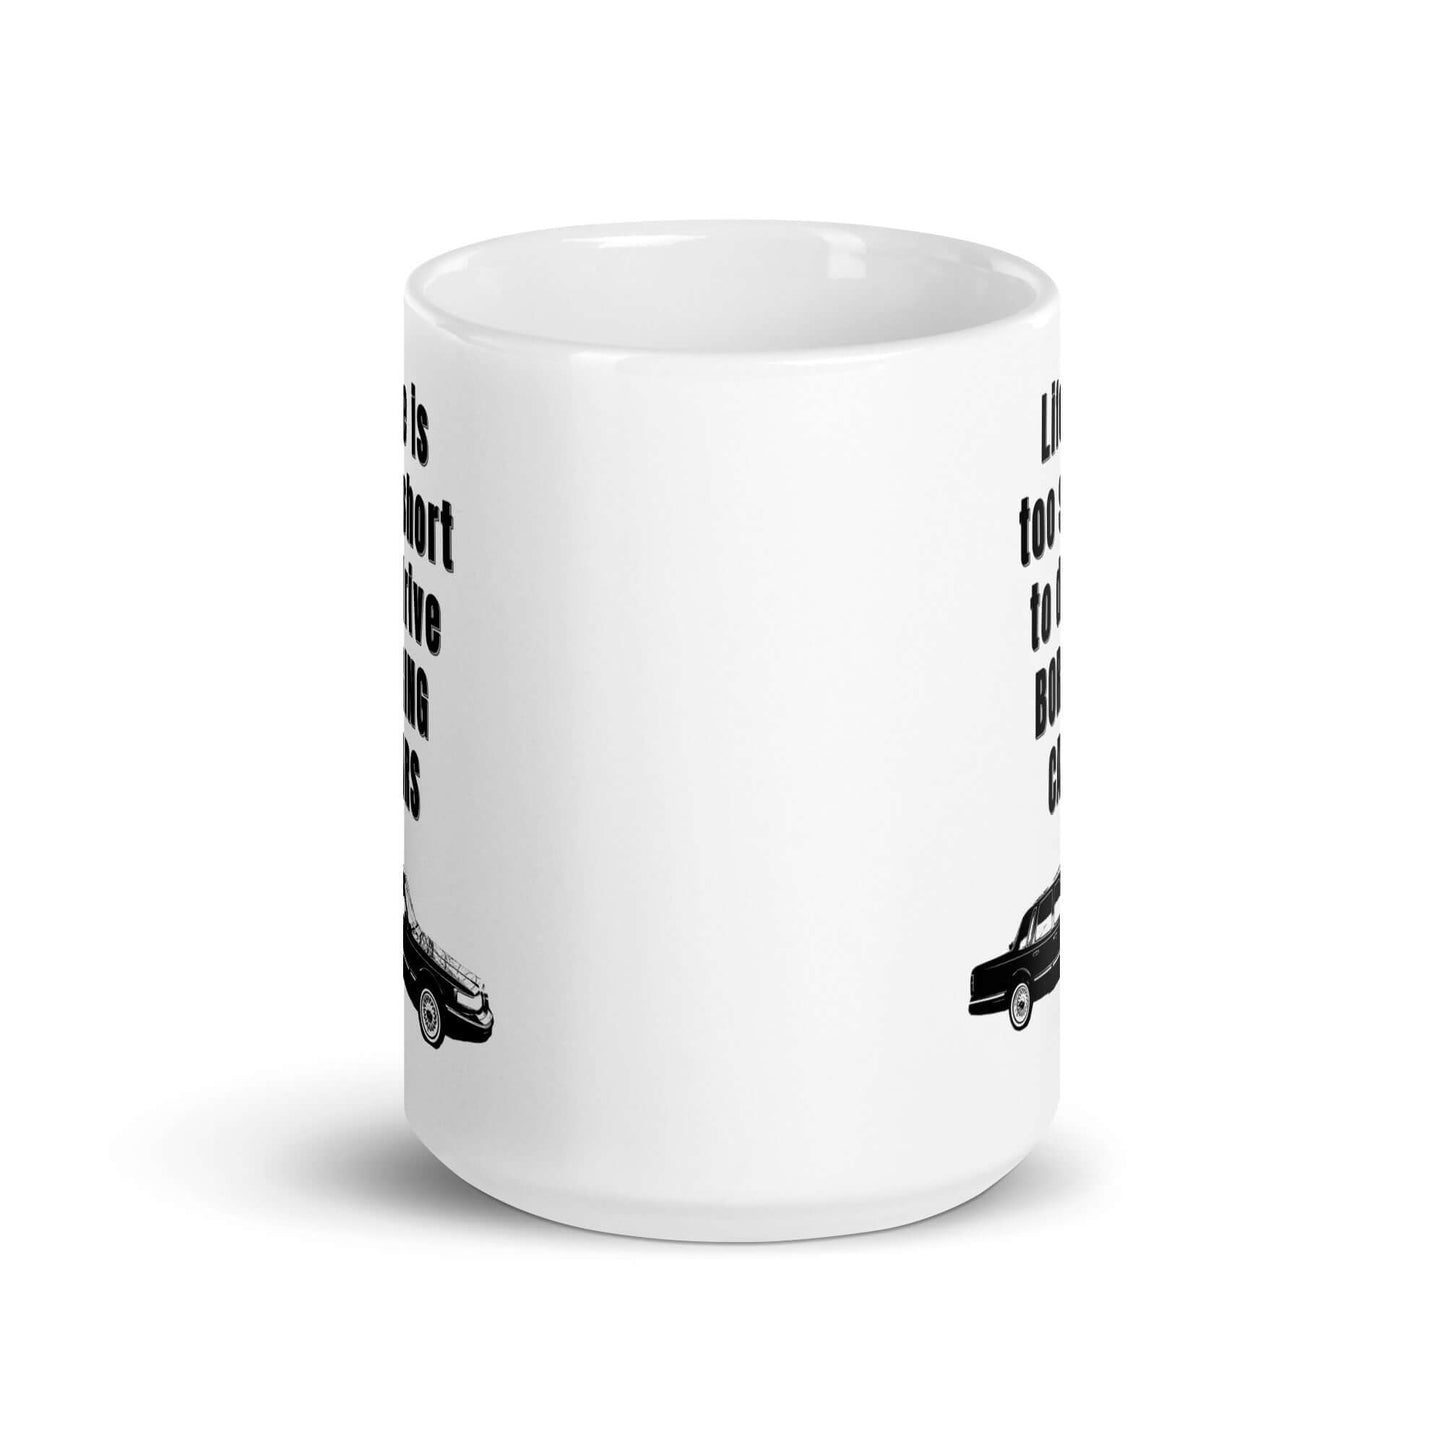 Life is too short to drive boring cars - 1997 Lincoln Town Car - White glossy mug - Horrible Designs